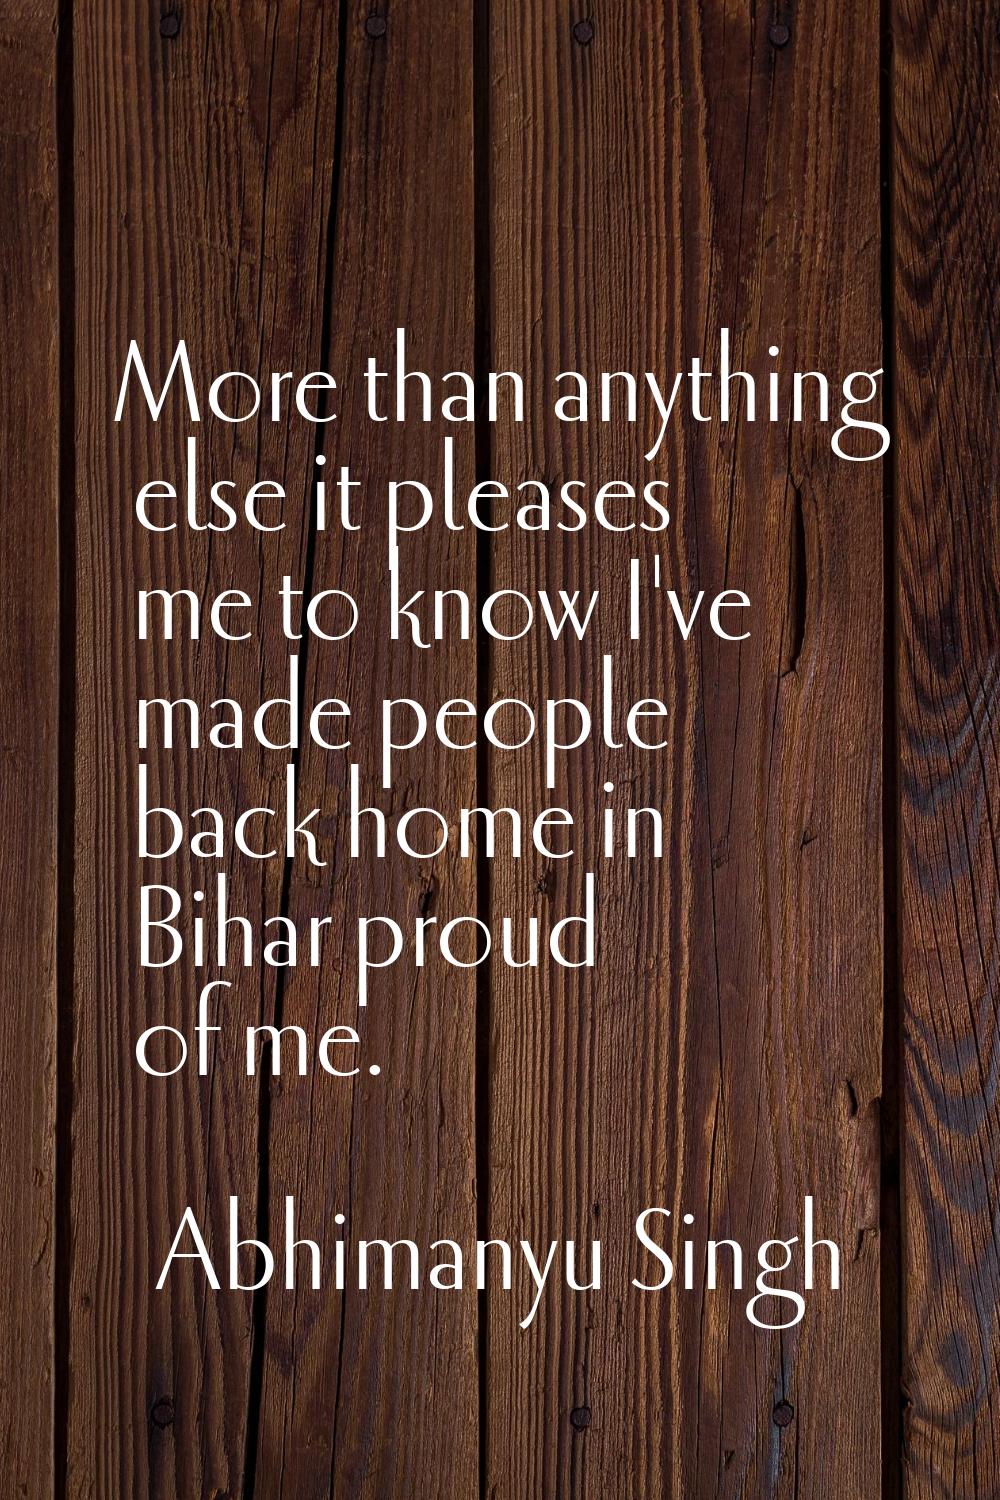 More than anything else it pleases me to know I've made people back home in Bihar proud of me.